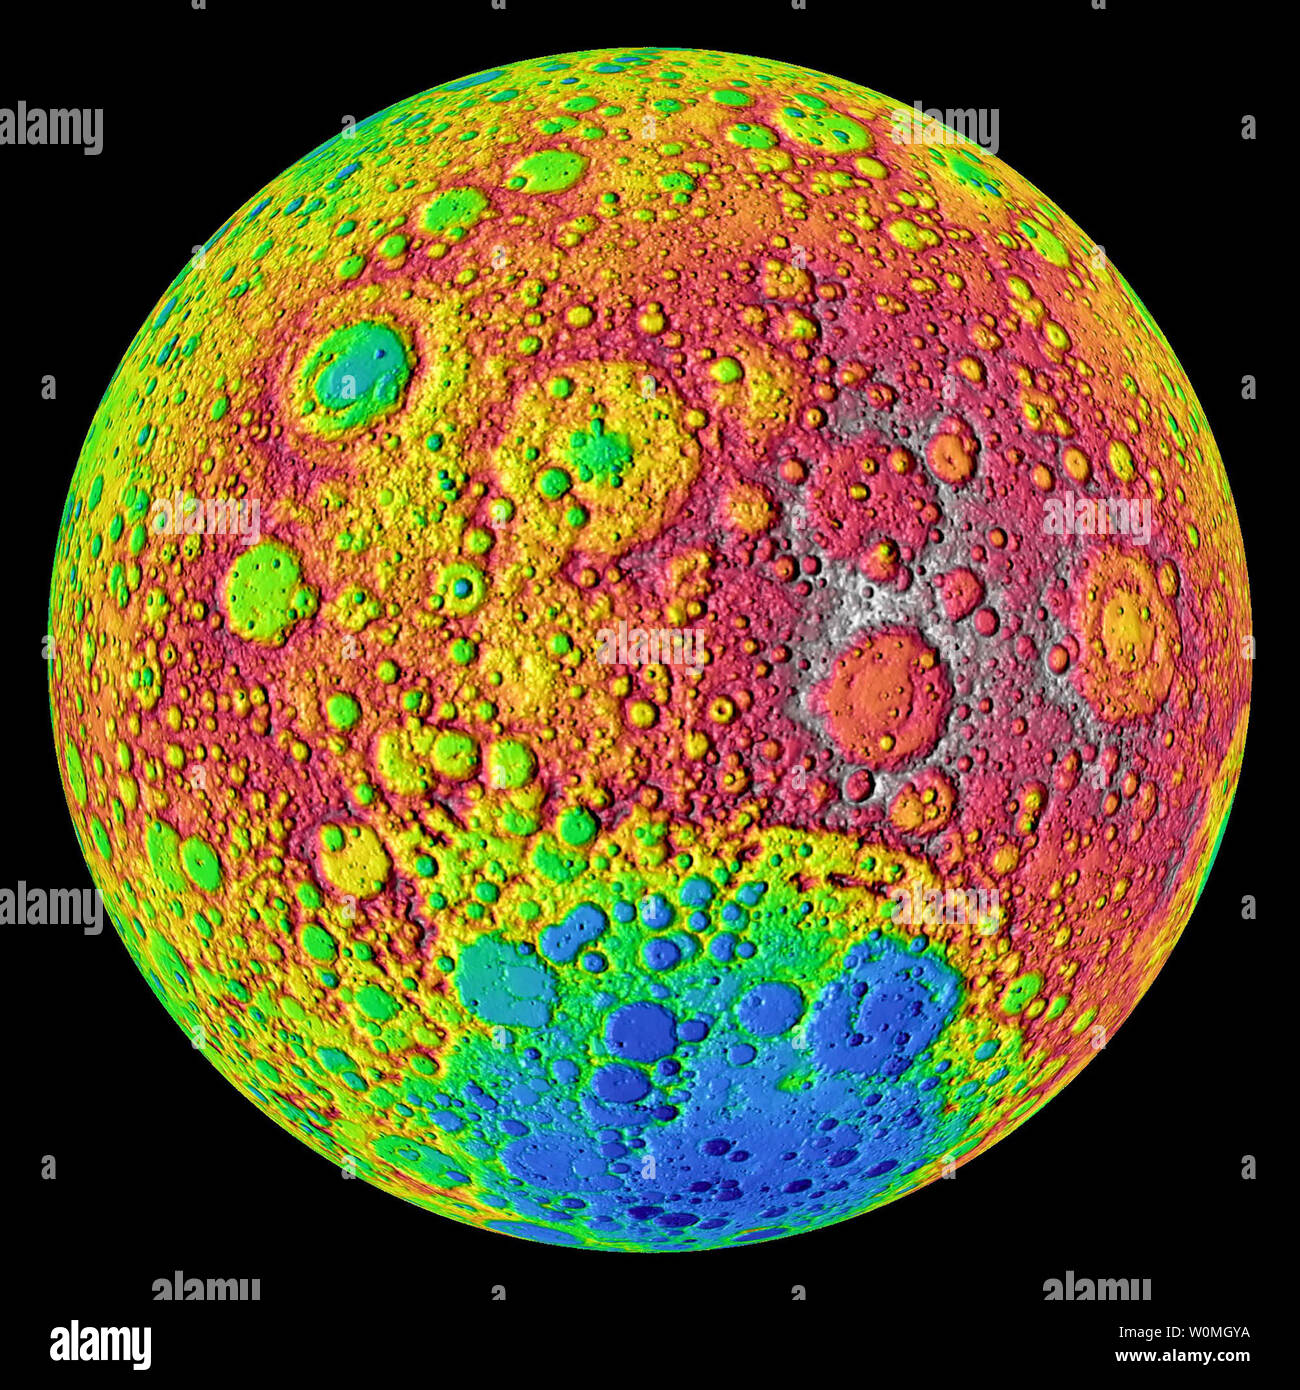 NASA's Lunar Reconnaissance Orbiter's (LRO) LOLA laser altimeter shows a  color-coded image of elevations on the far side of the moon, June 24, 2010.  The moon's topography is seen from LRO's LOLA